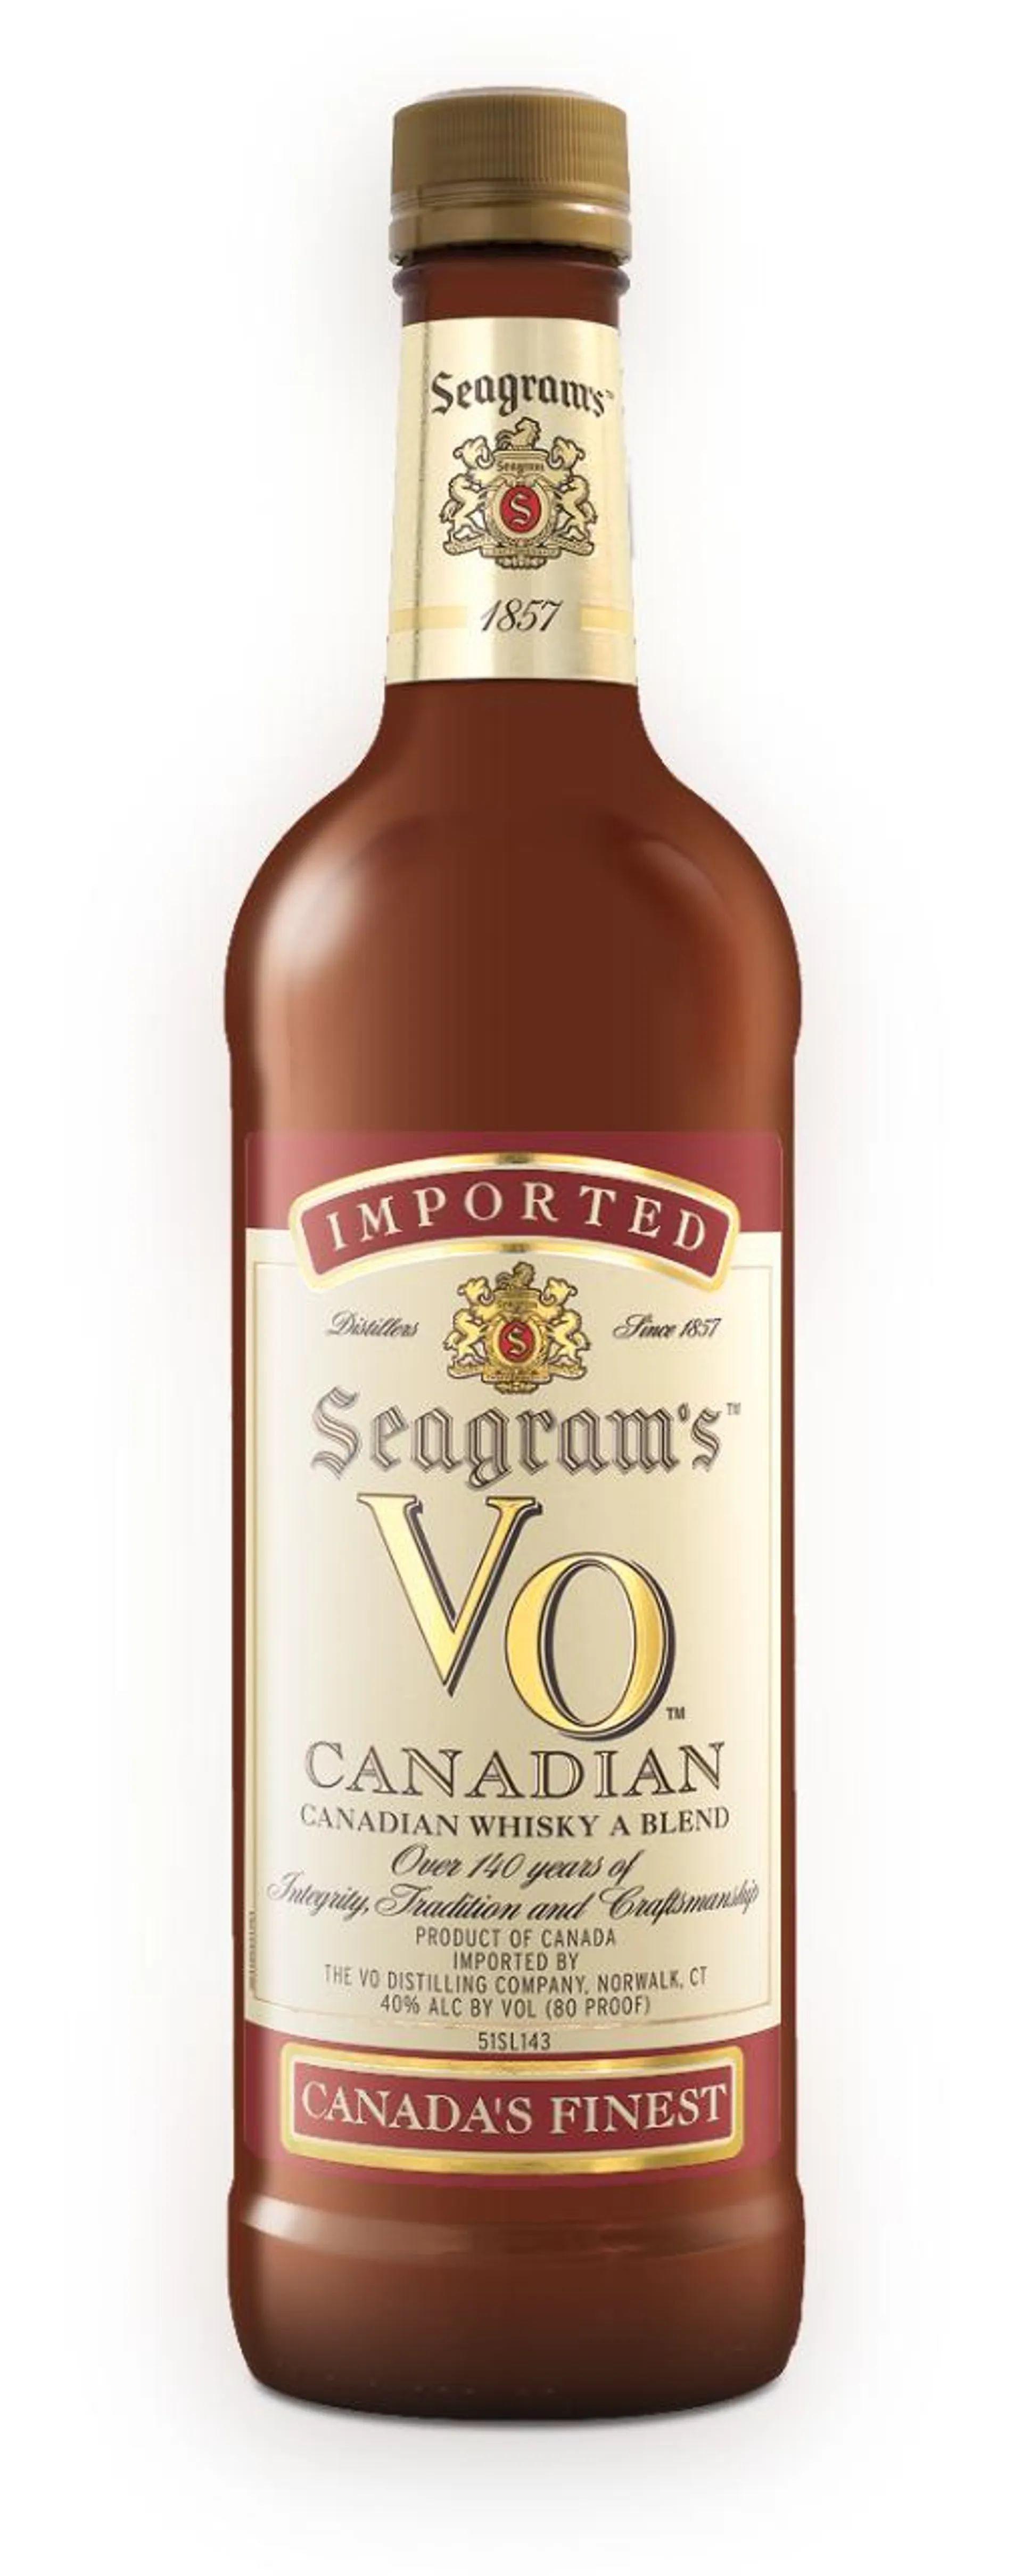 Seagrams VO Canadian Whisky 40% ABV